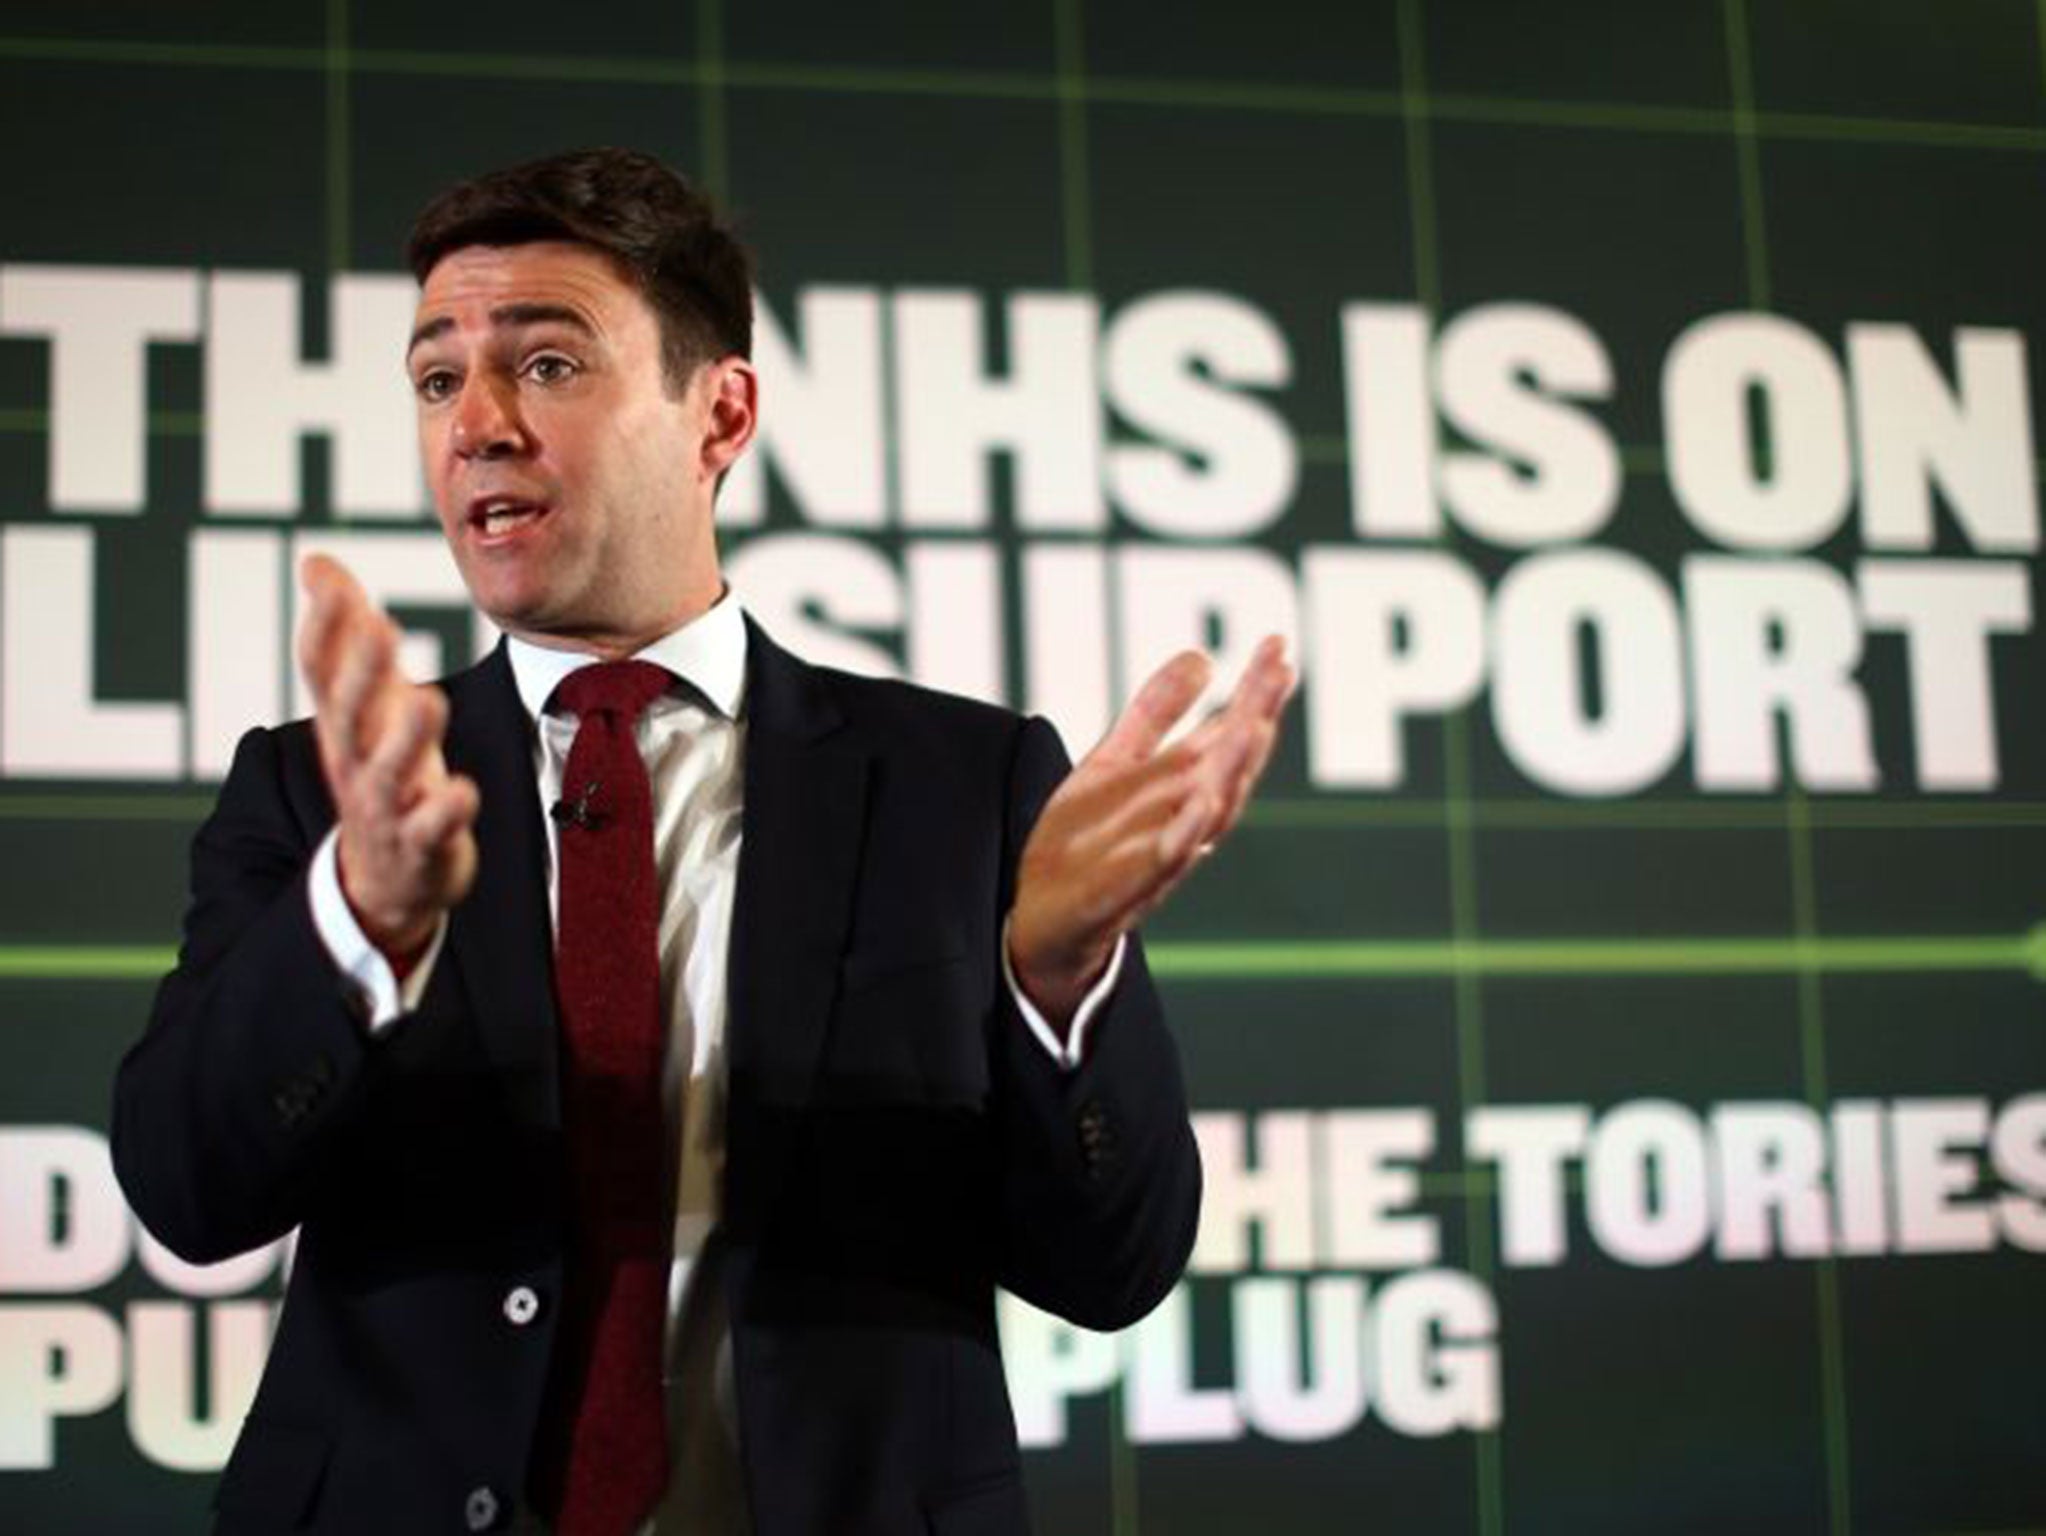 The shadow Health Secretary, Andy Burnham, has condemned the Conservatives for opening up the NHS to private-sector providers